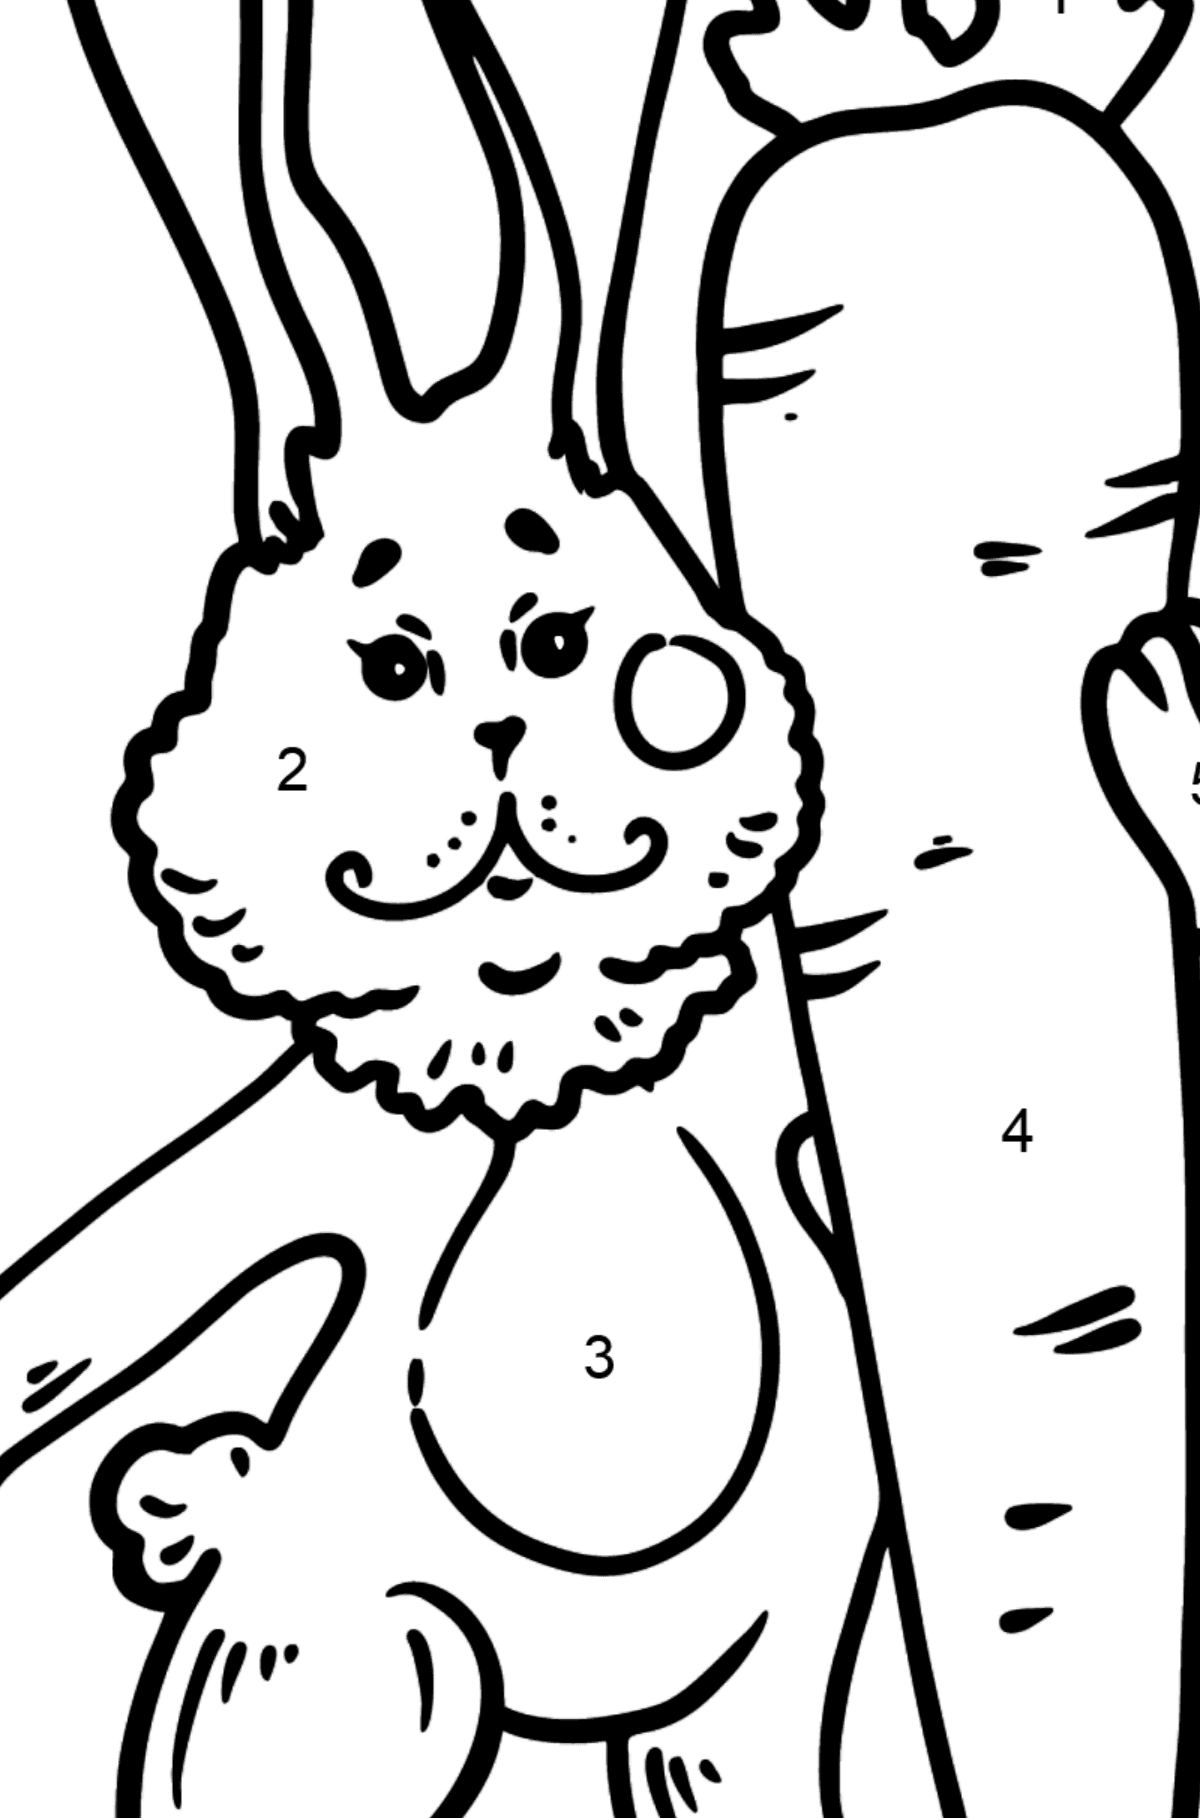 Bunny with Carrot coloring page - Coloring by Numbers for Kids